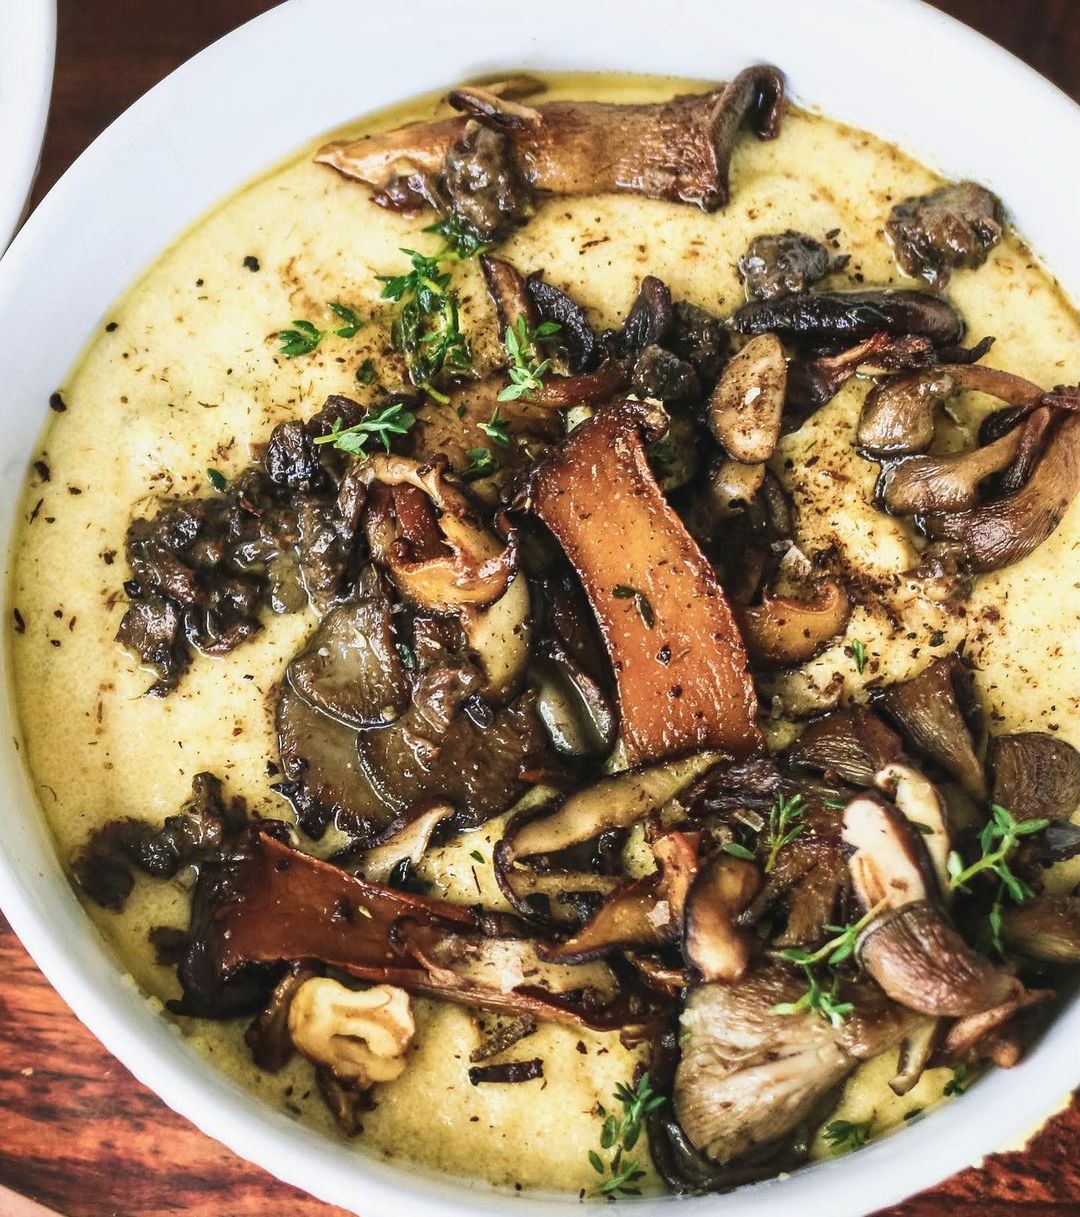 A bowl of food with mushrooms and herbs.